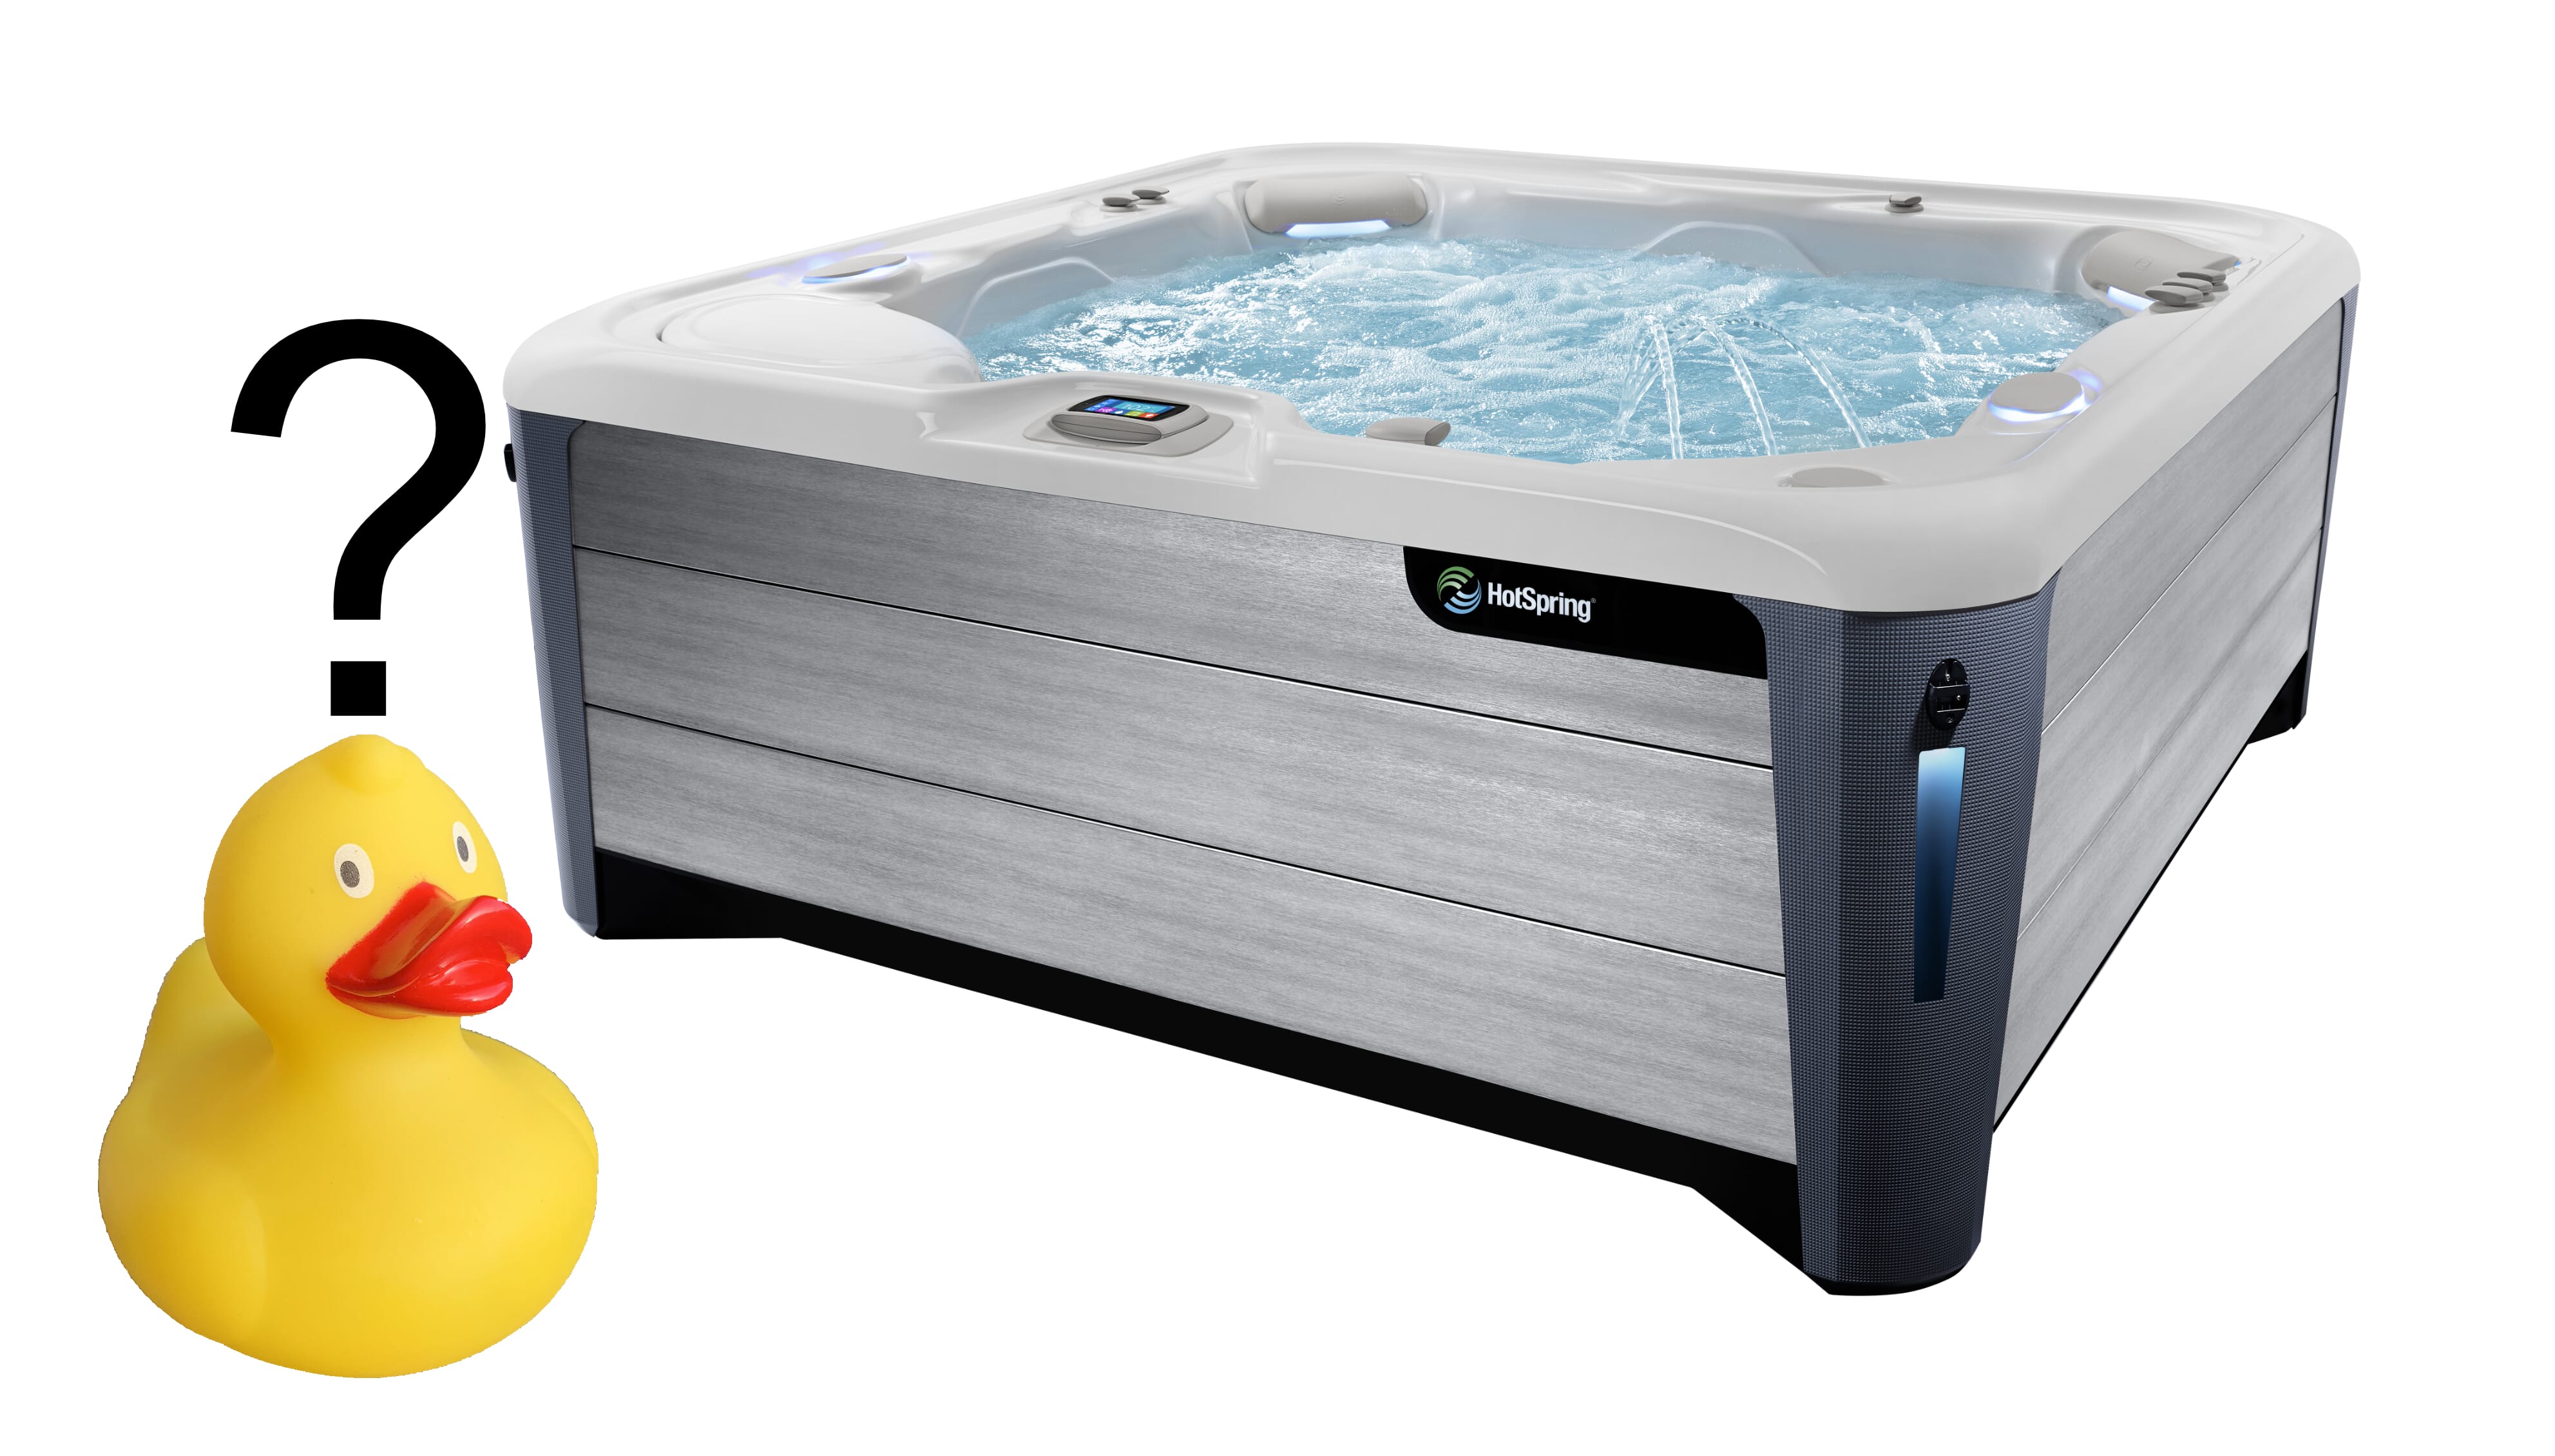 5 Things To Ask When Buying a Hot Tub